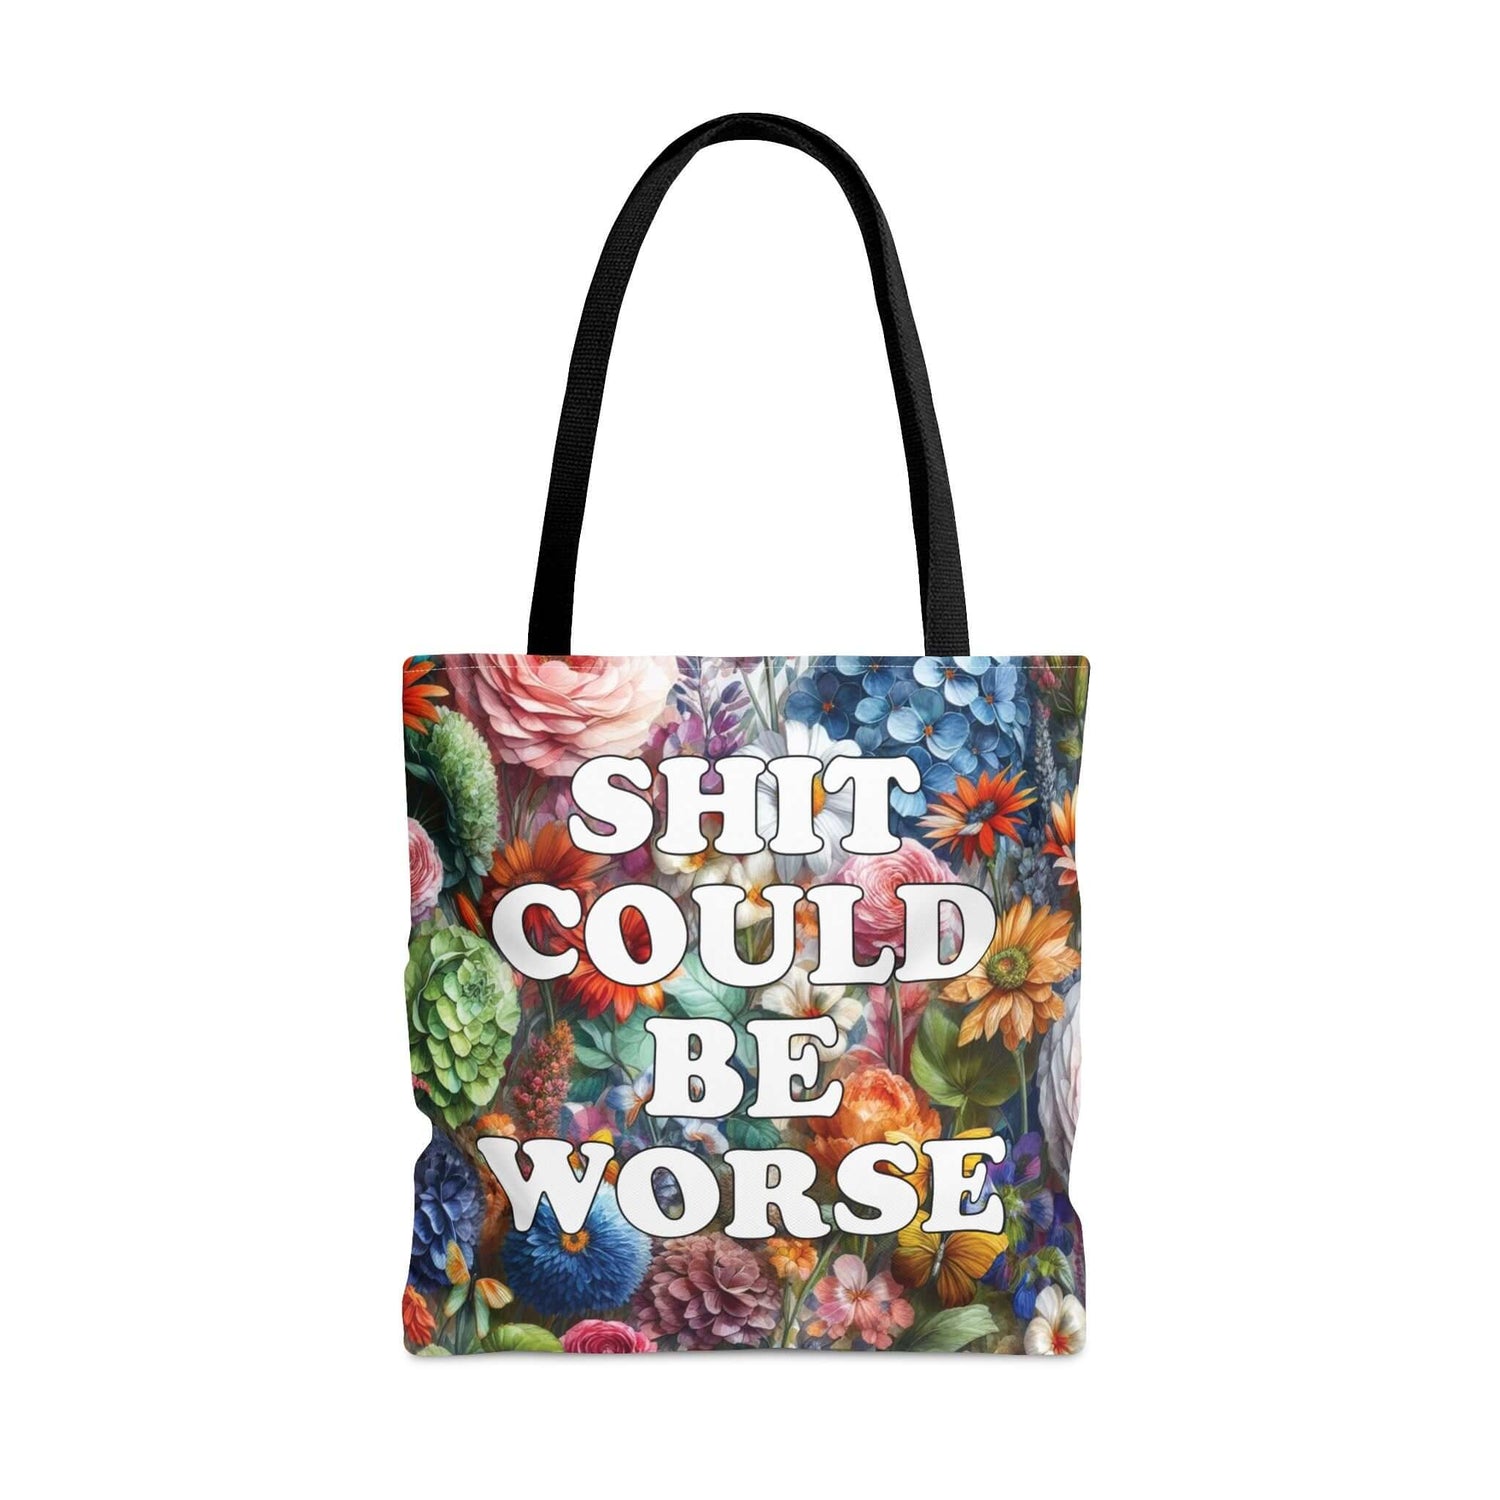 Tote bag with floral background and the words Shit could be worse printed on both sides.